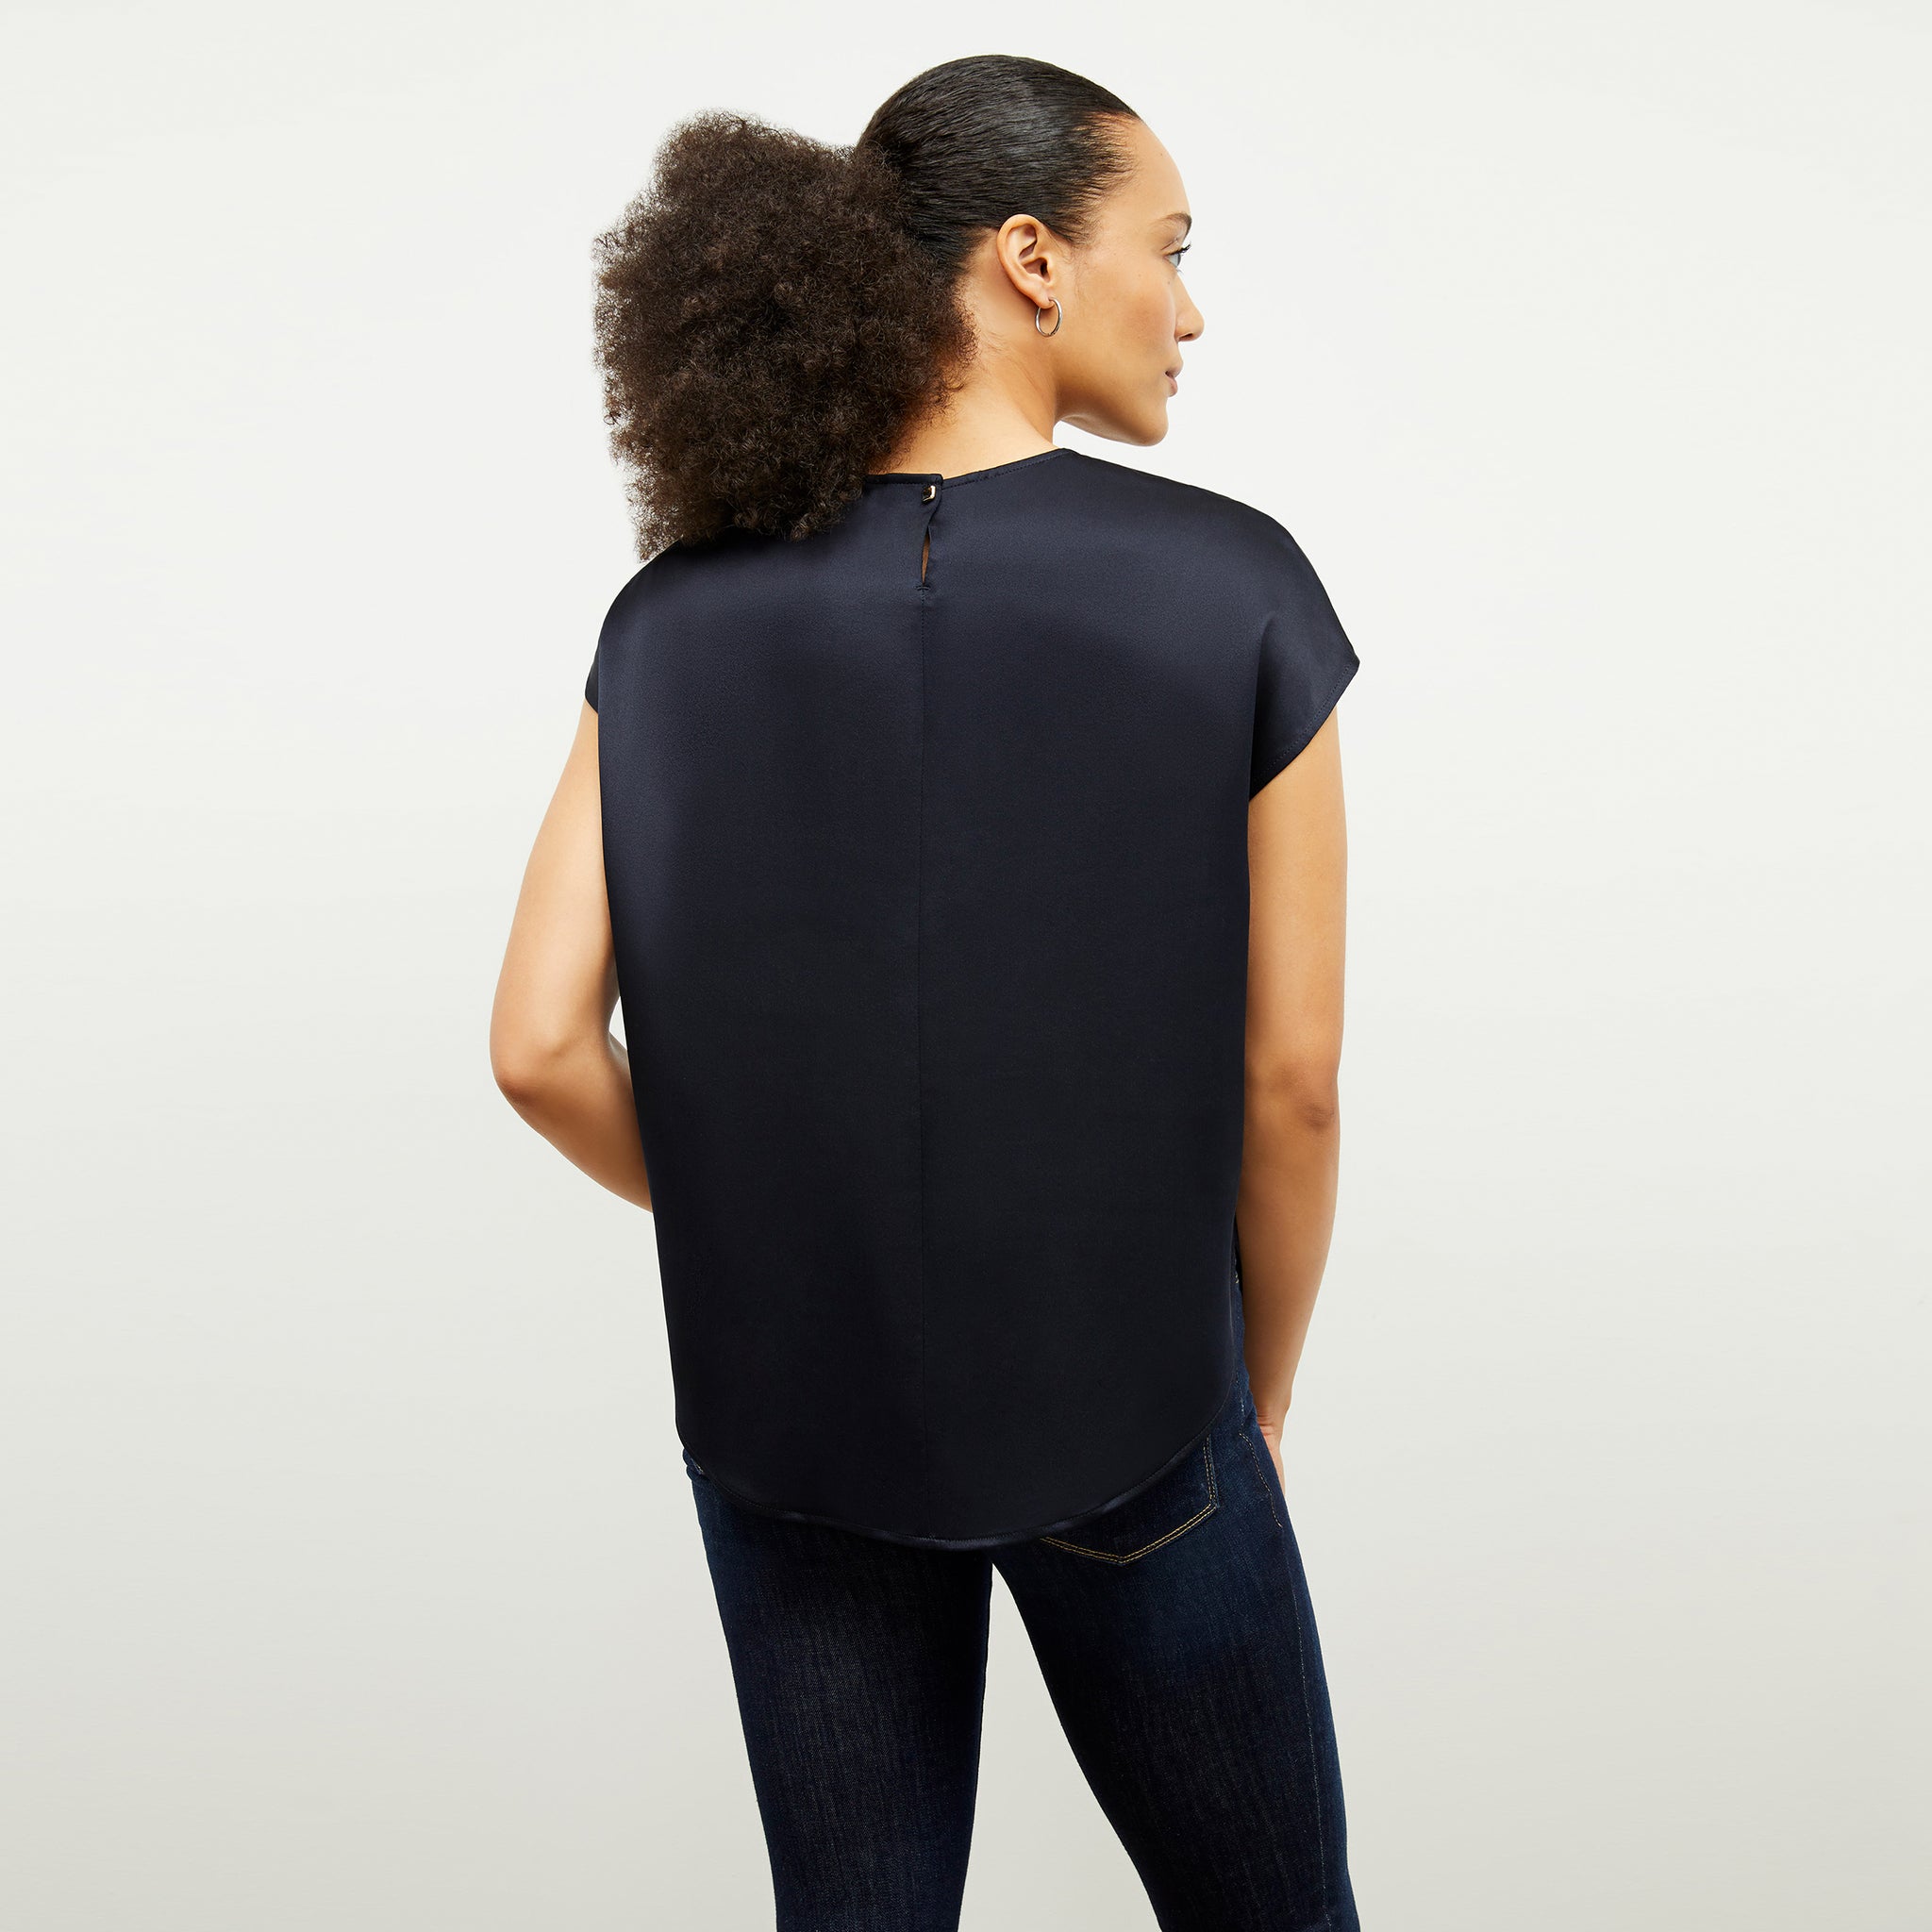 Back image of a woman wearing the Didion Top in Galaxy Blue